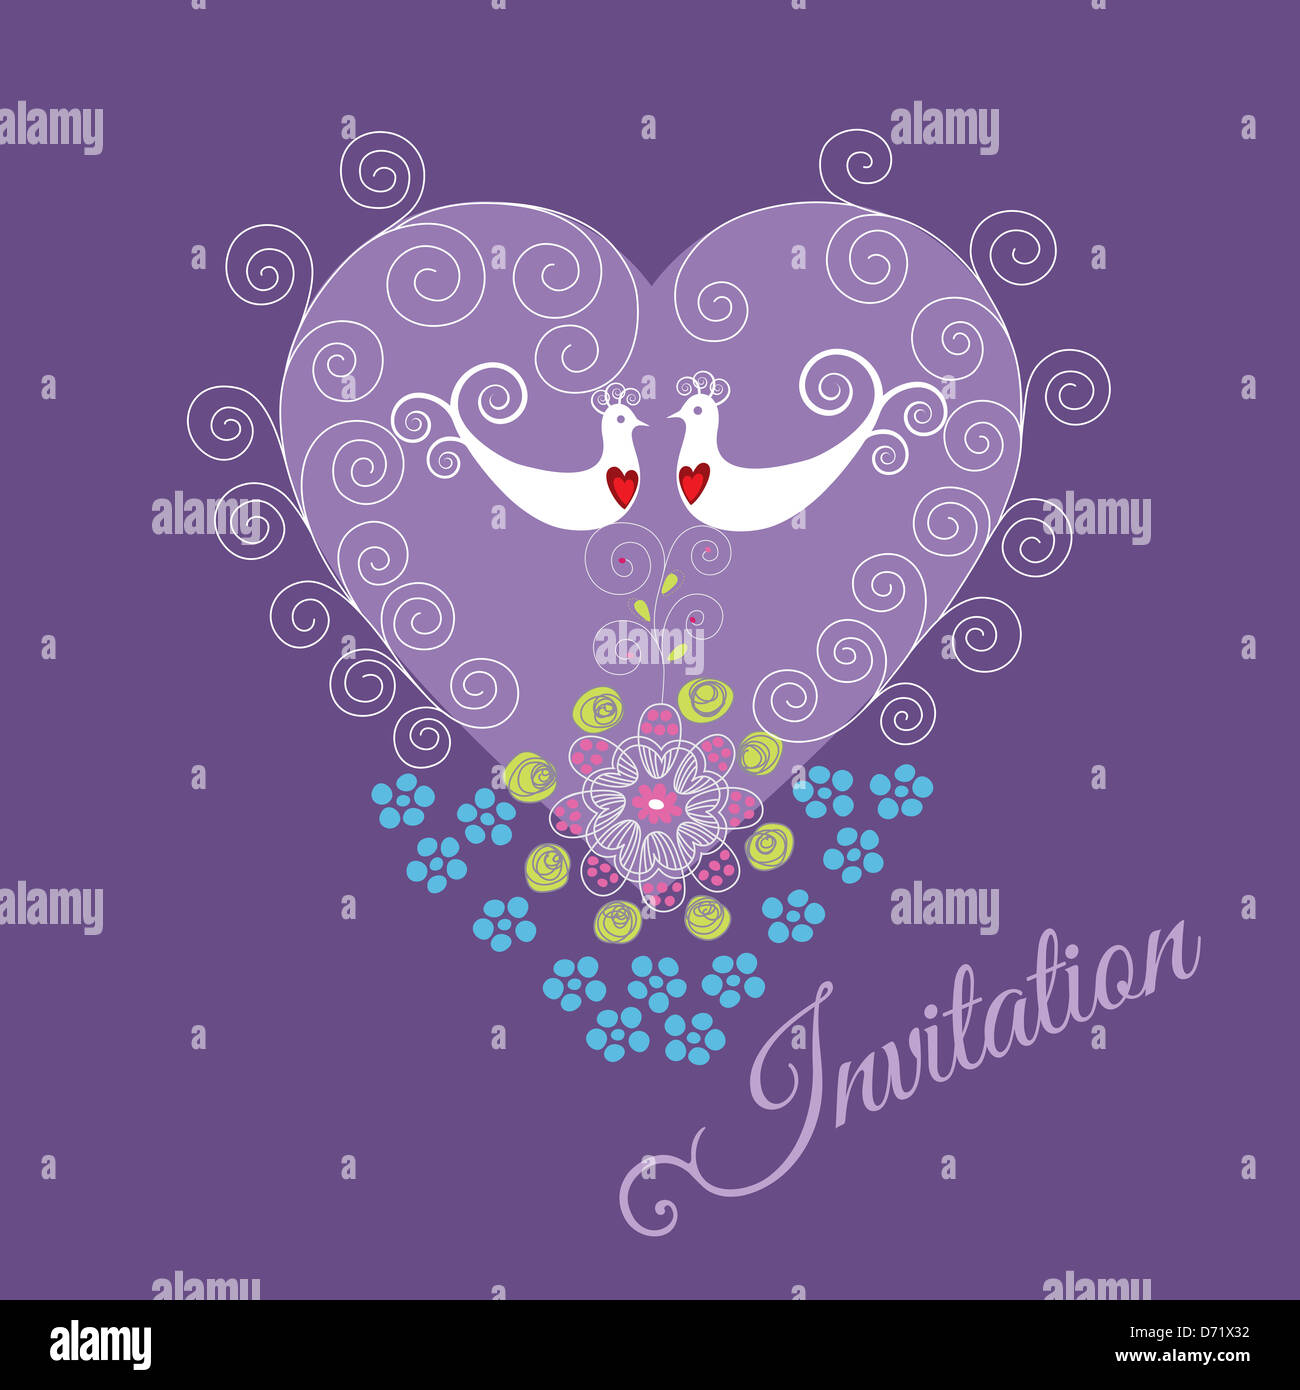 Purple invitation with two love birds, heart ornament, swirls and flowers Stock Photo